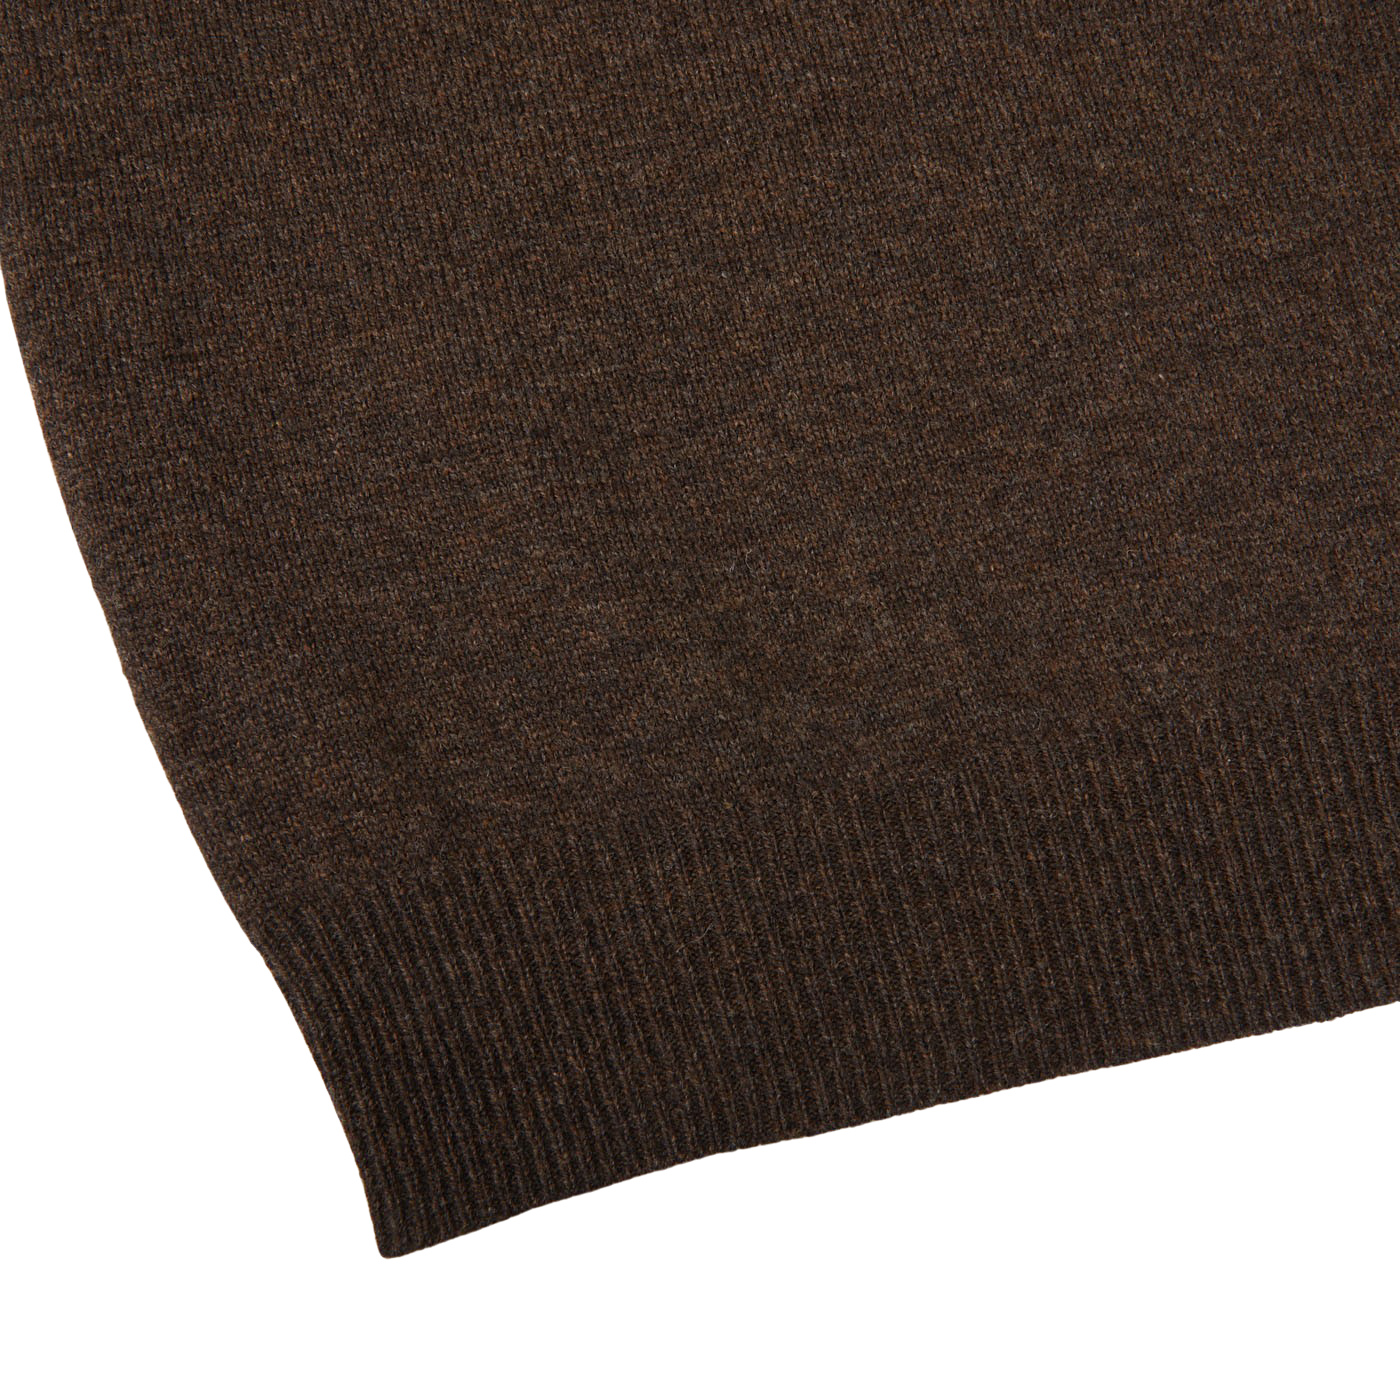 Alan Paine Cocoa Brown Lambswool V-Neck Edge